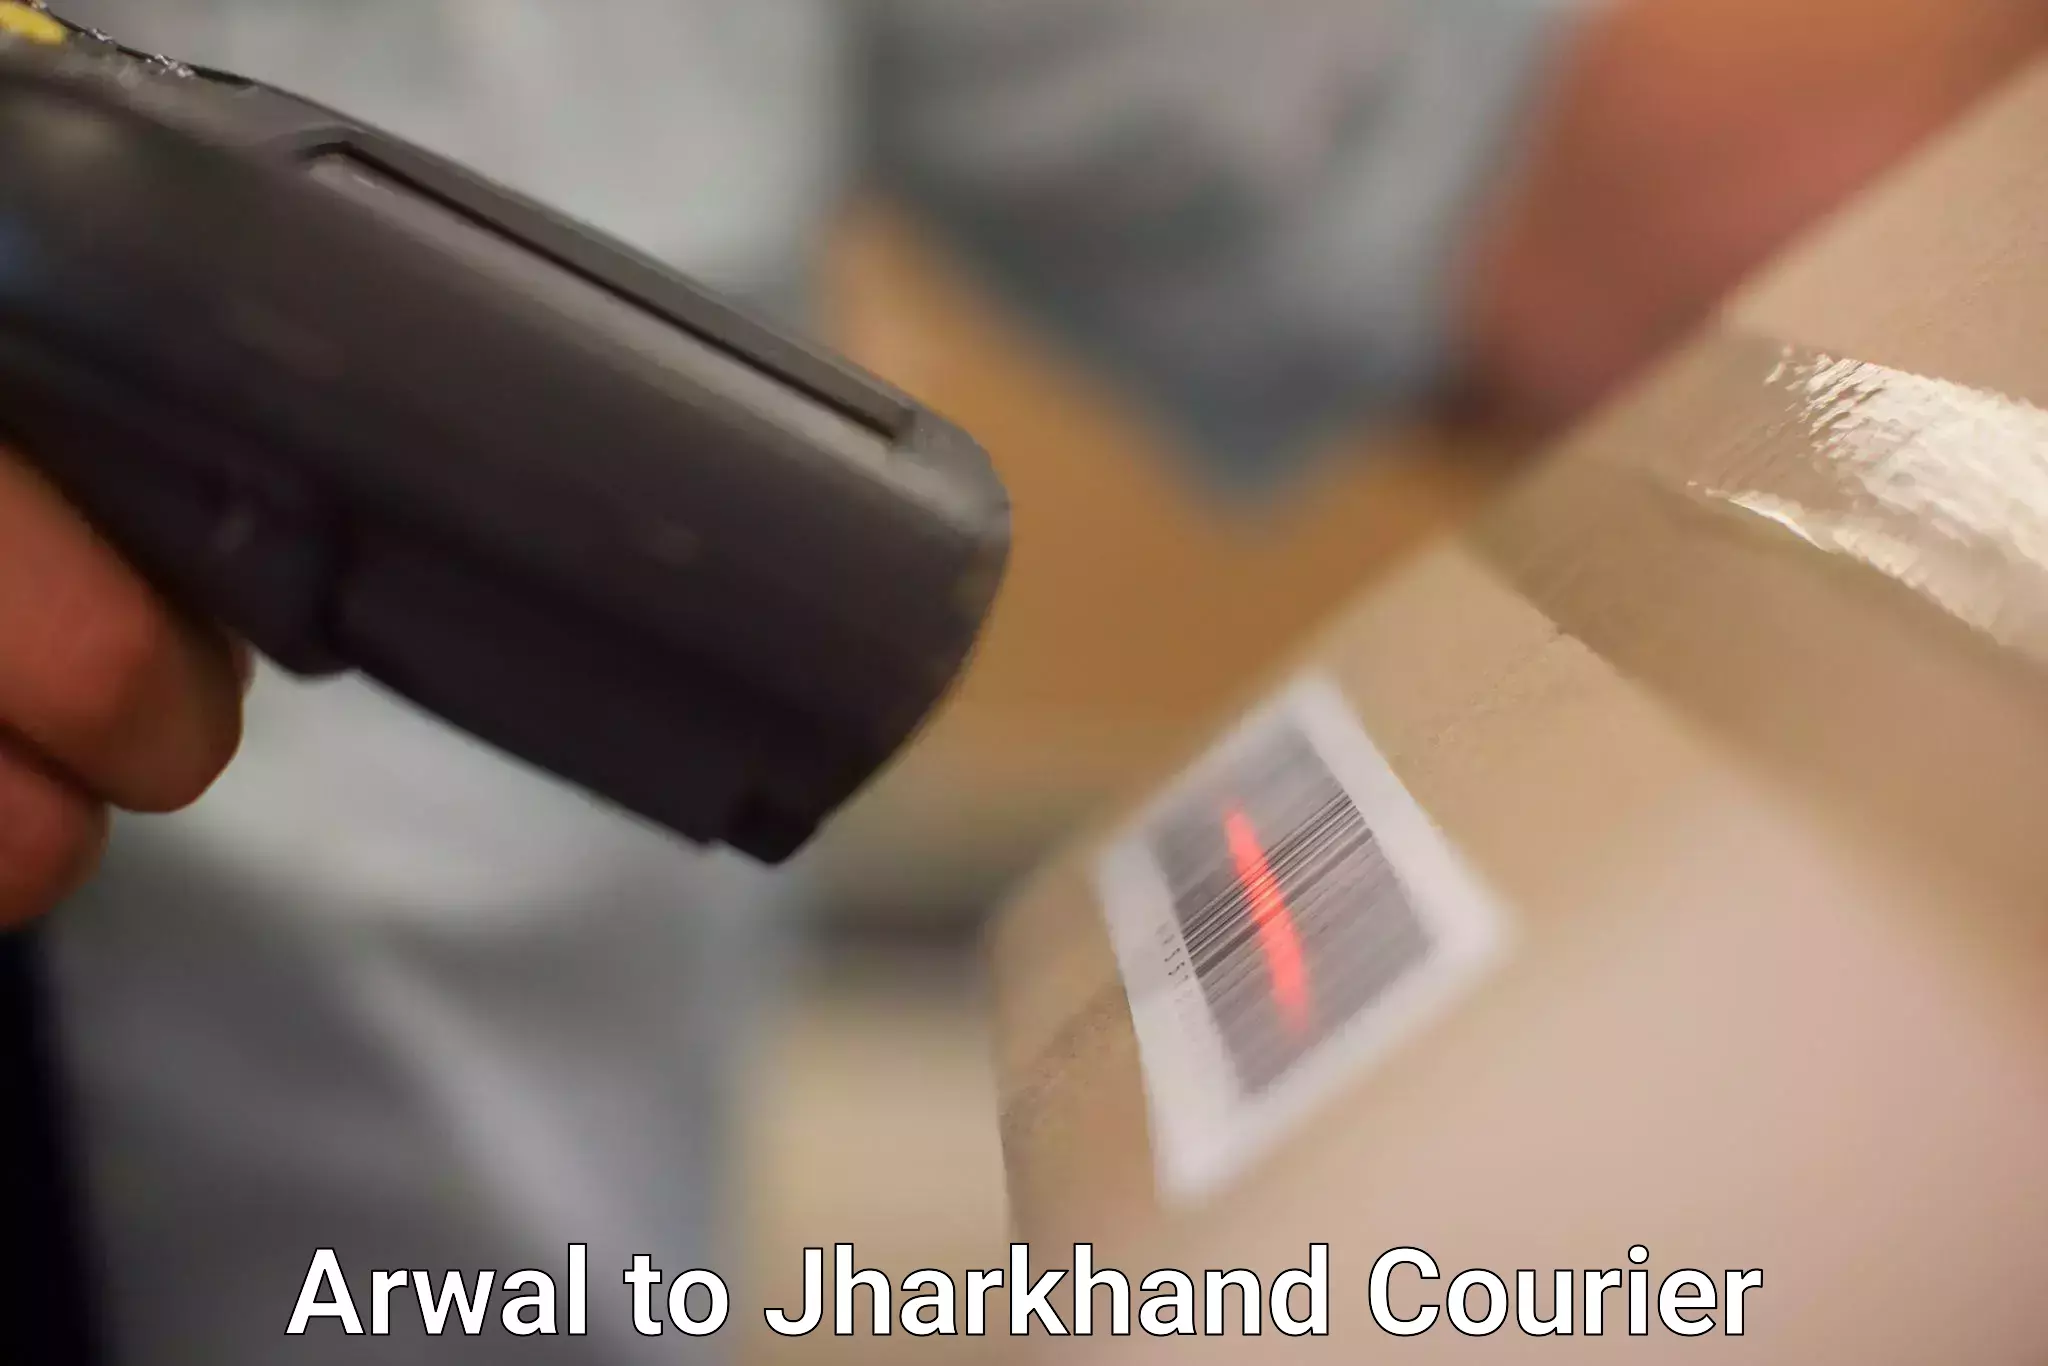 Business delivery service Arwal to Jharkhand